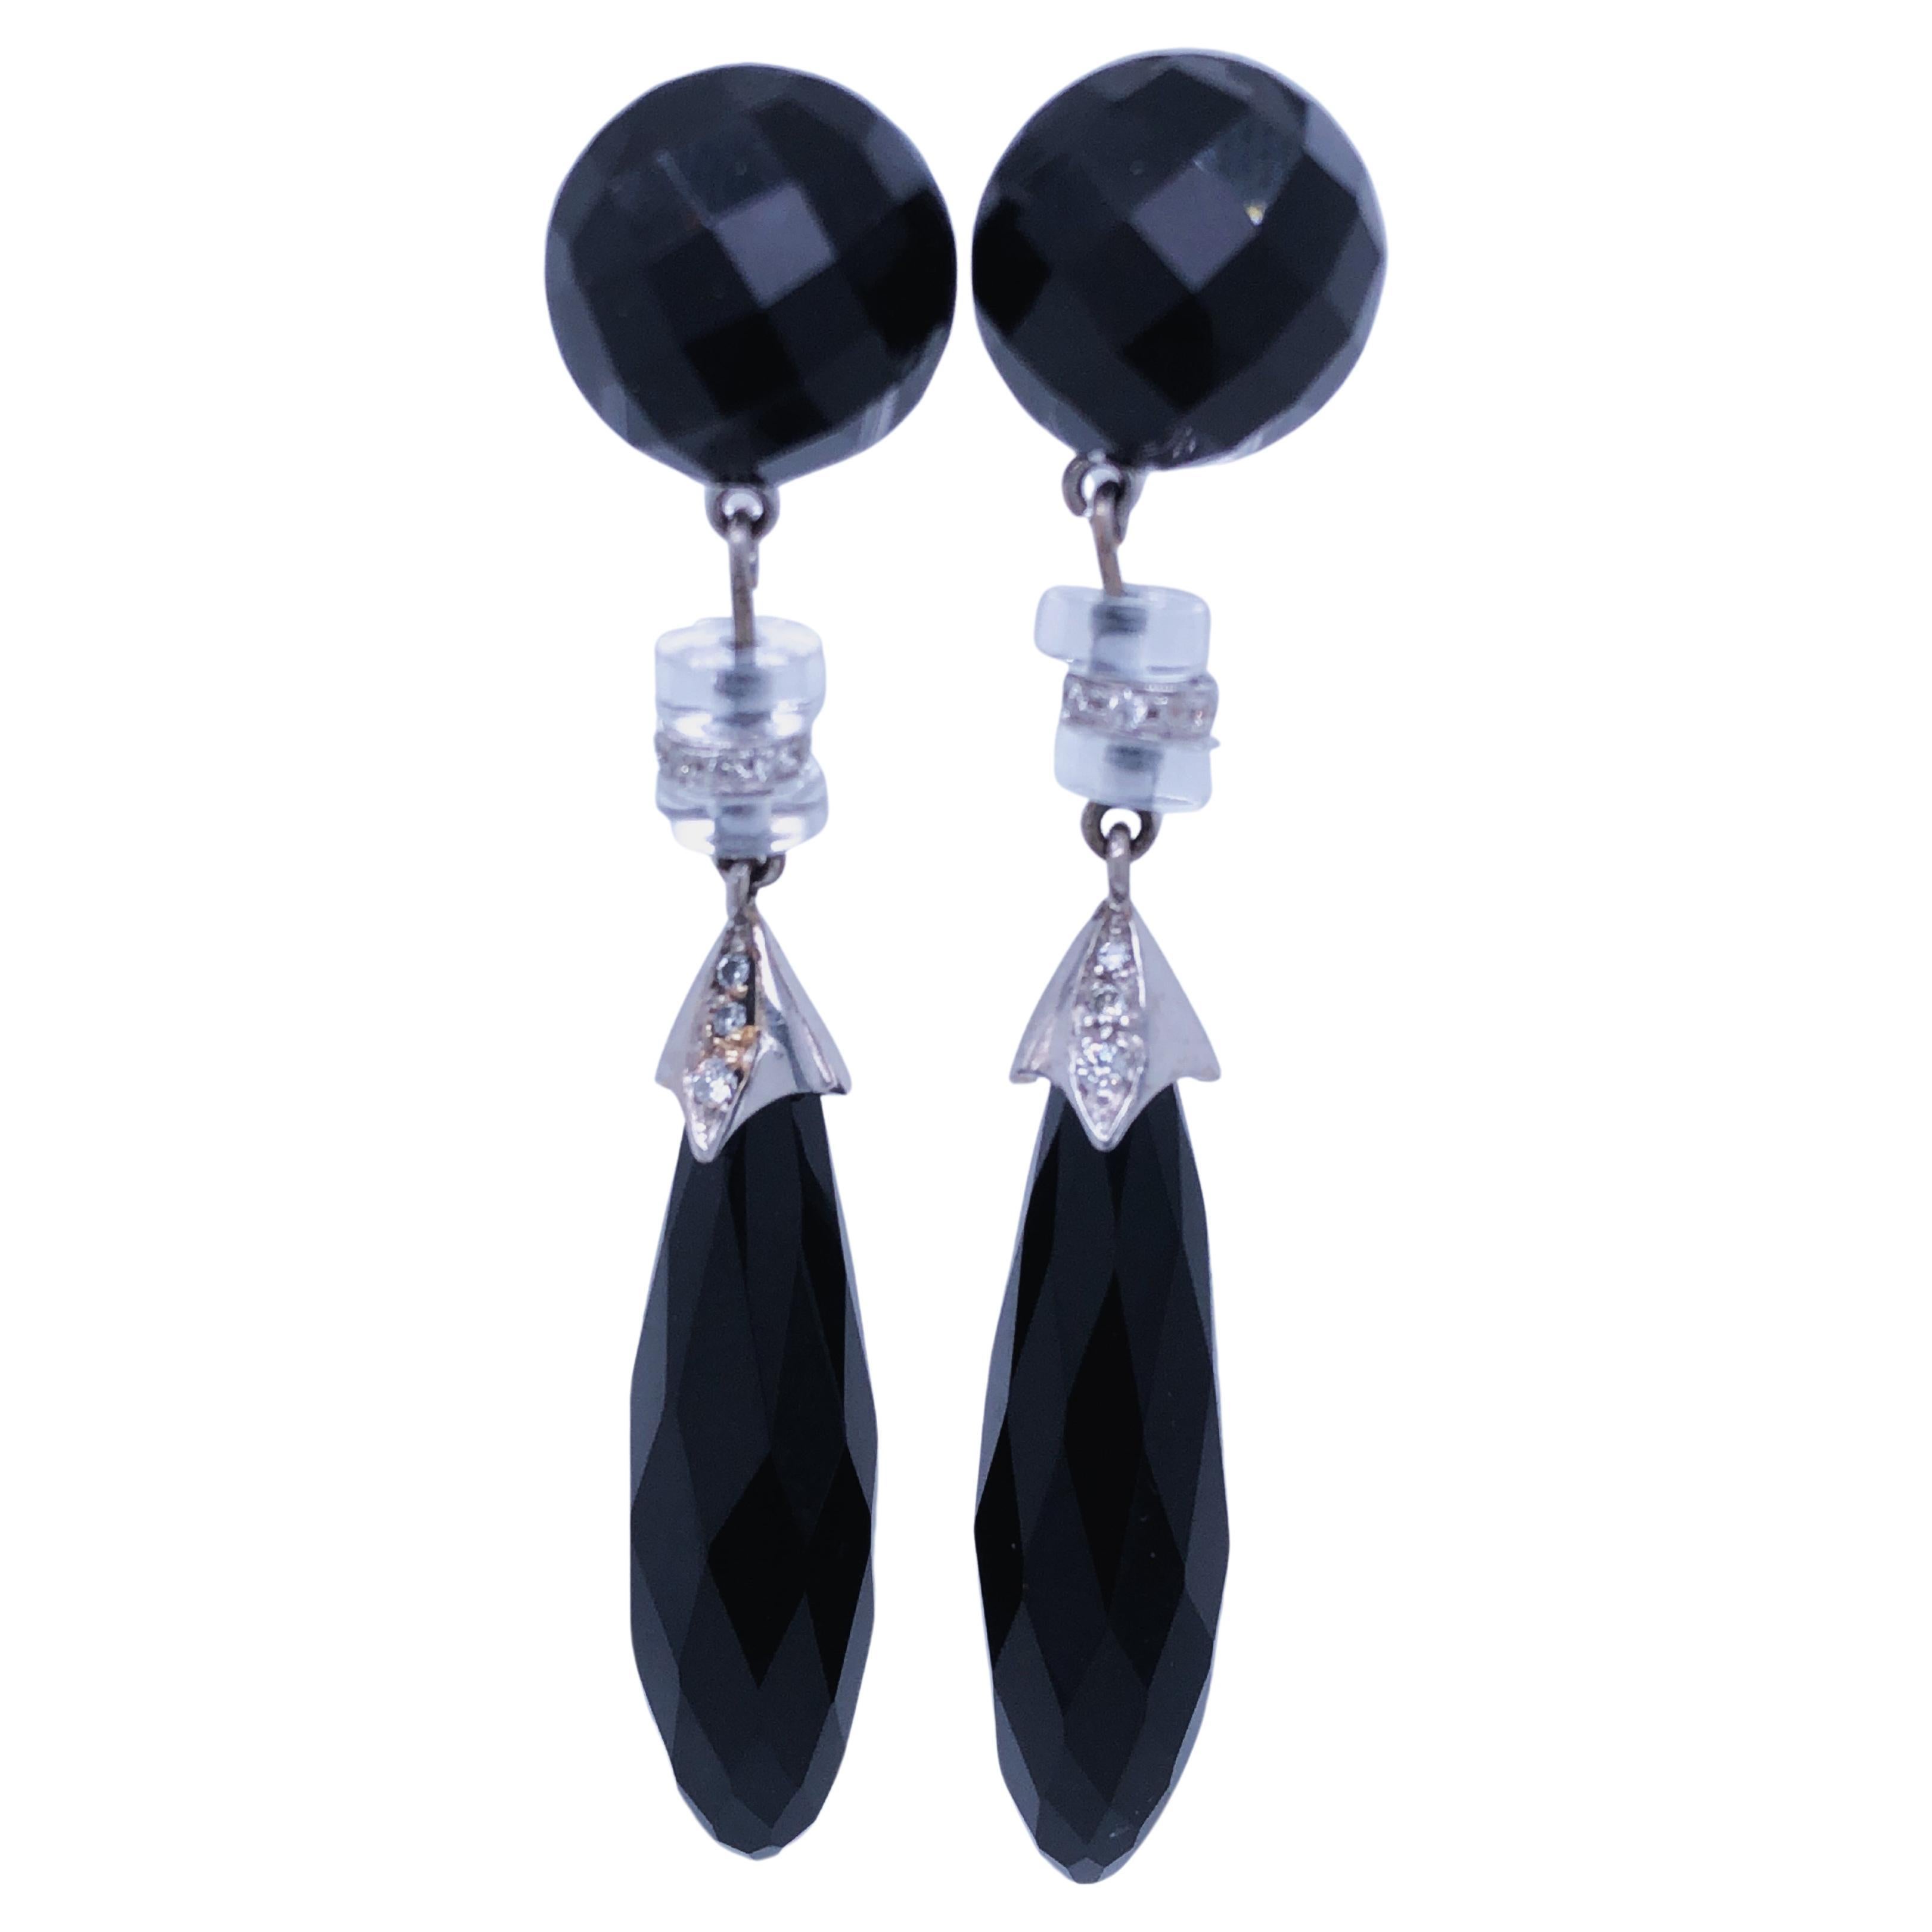 One-of-a-kind Chic yet Timeless Drop Earrings featuring 50Kt Hand Inlaid Natural Round Cabochon and Drop Faceted Cut Onyx in a 0.40Kt White Diamond and Rock Crystal disk 0.154 OzT 18K White Gold Setting.
In our smart fitted tobacco suede leather